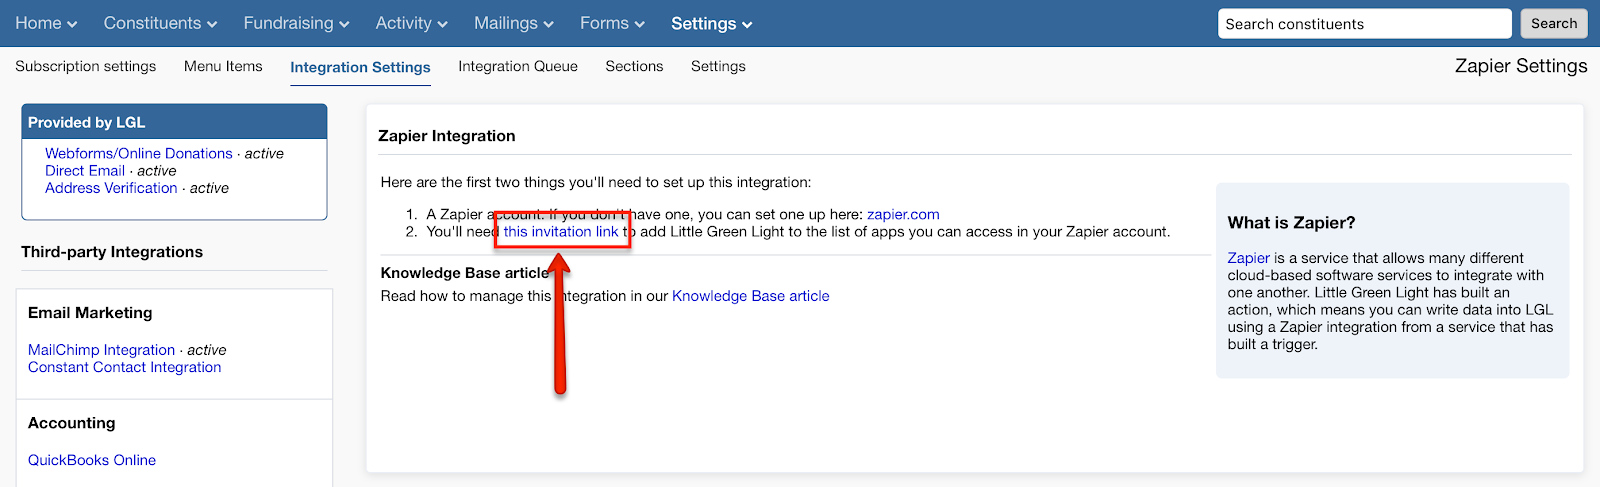 Set up Zapier integration in your LGL account